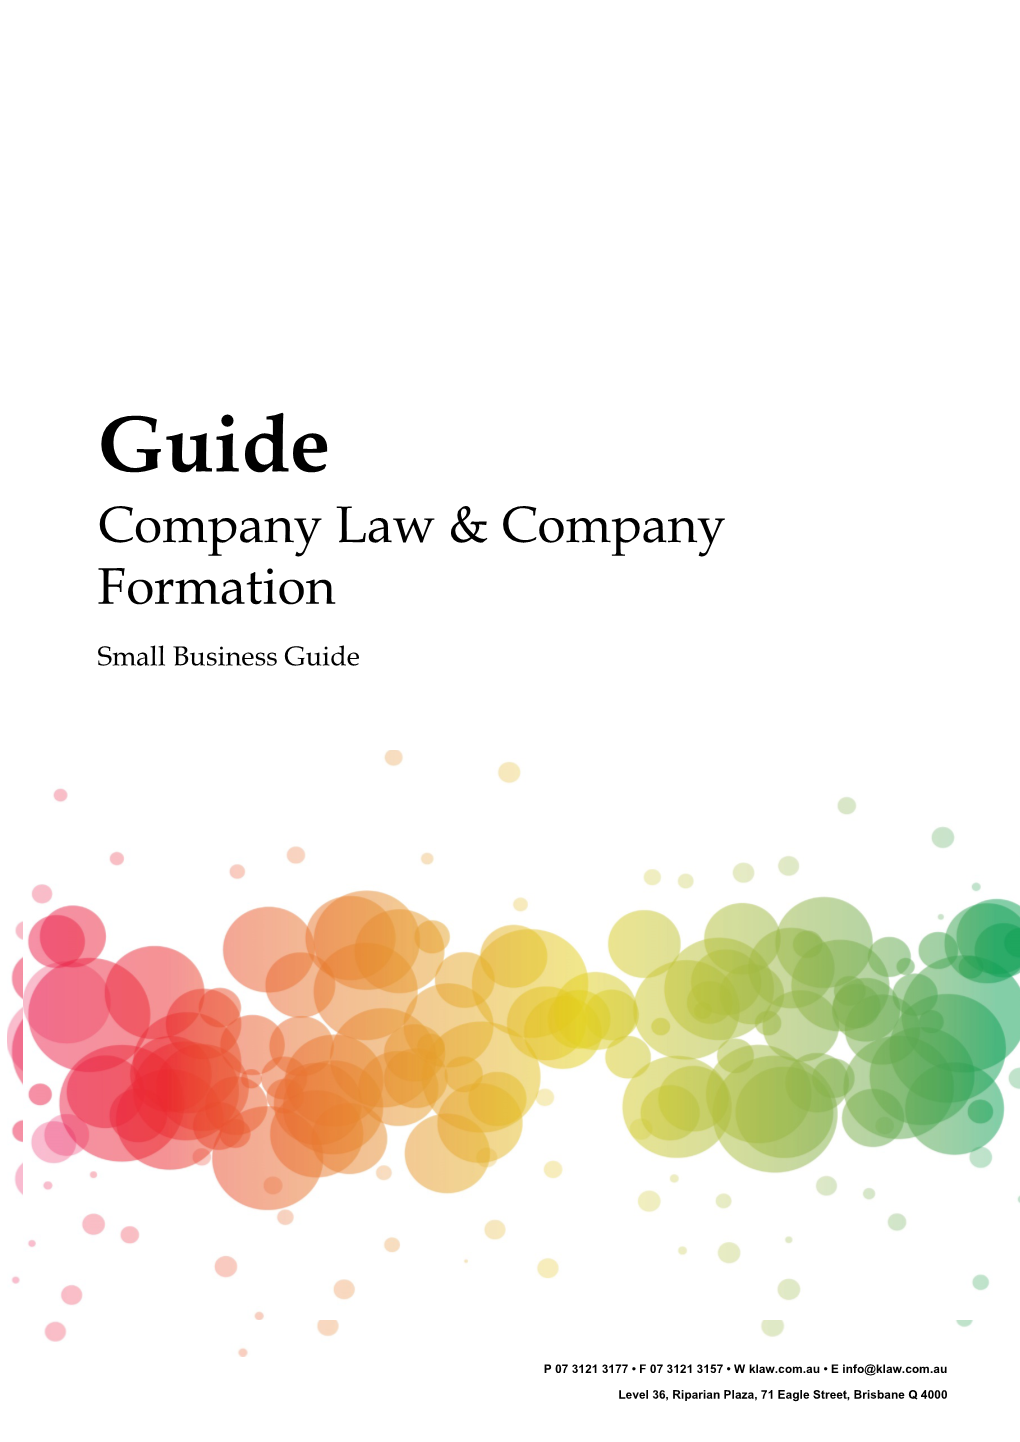 Company-Law-Small-Business-Guide